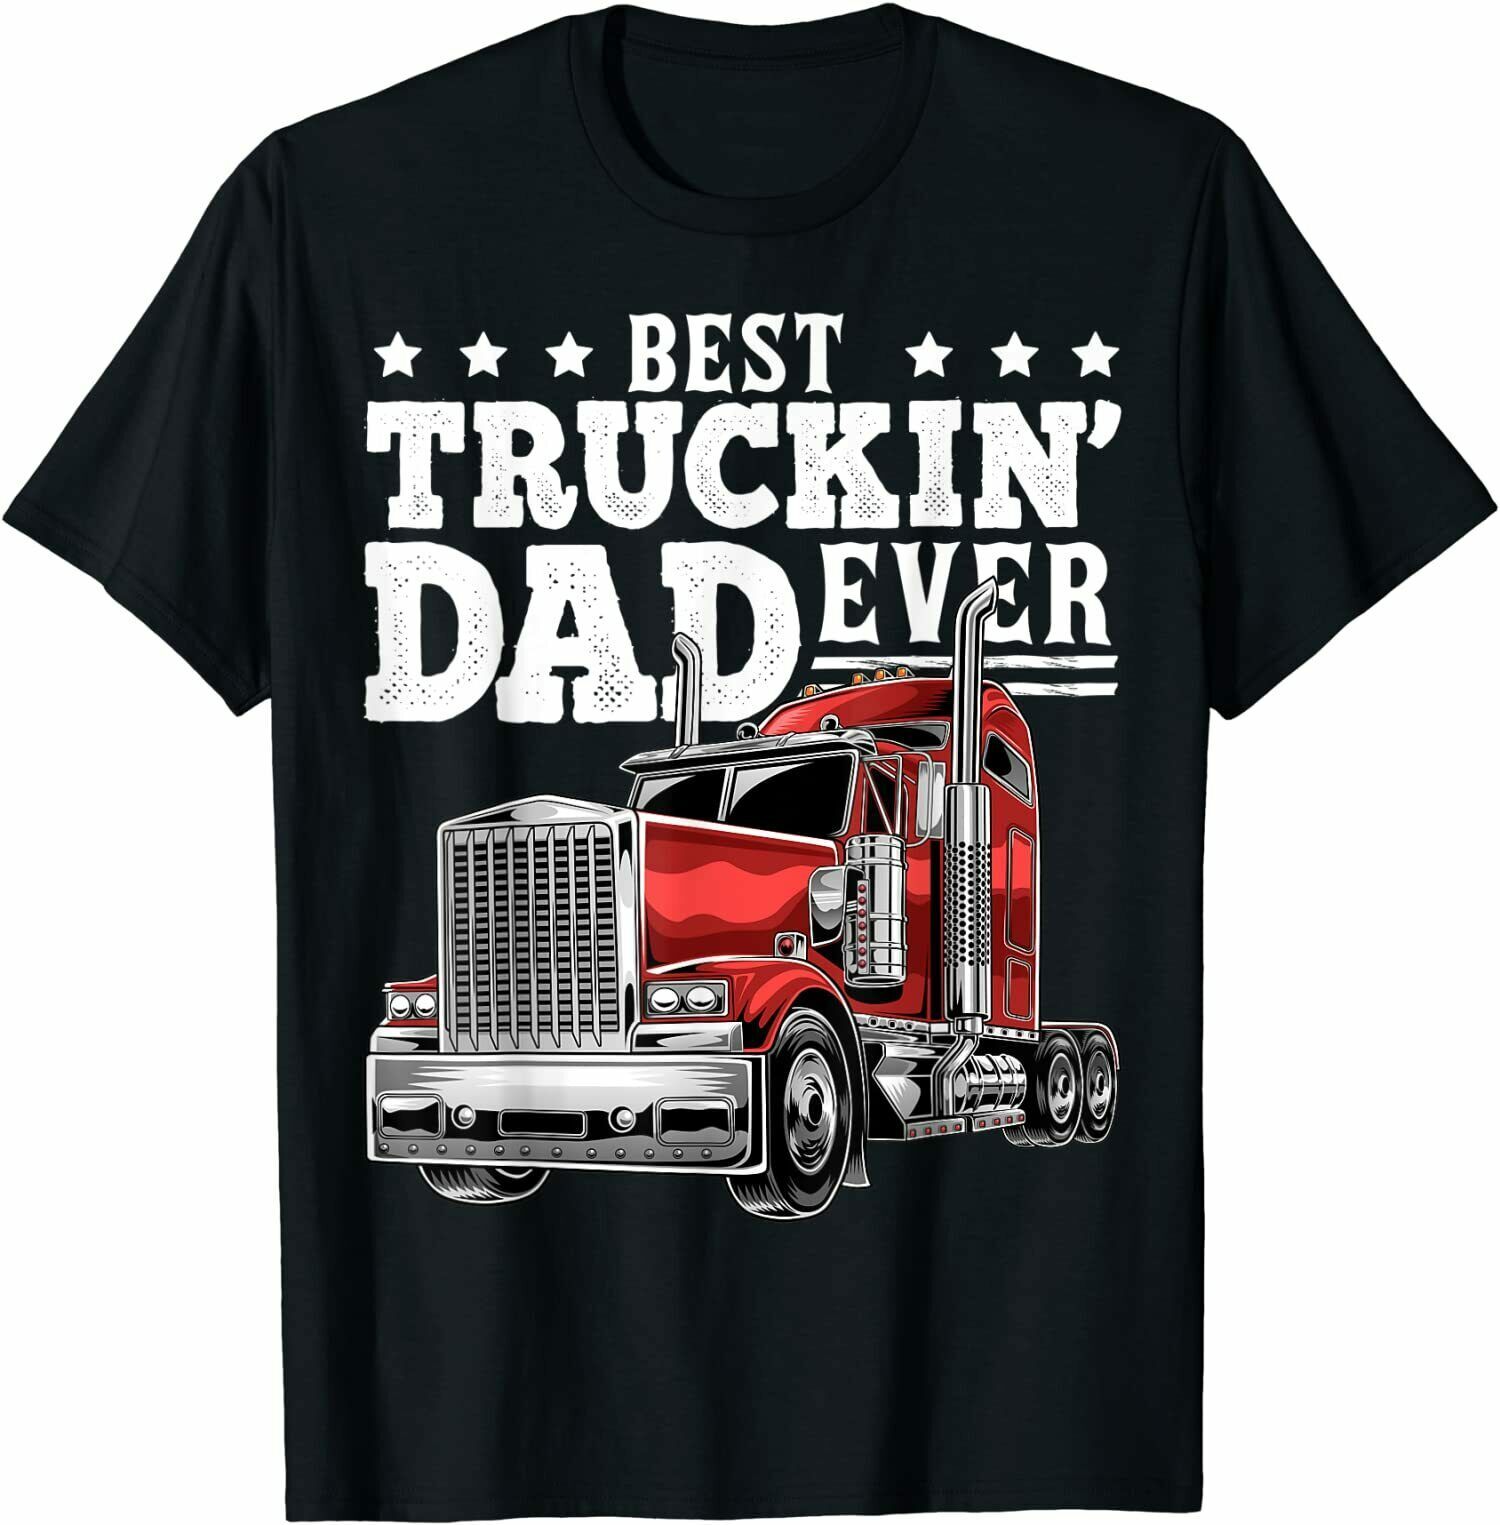 Trucker father's day gifts